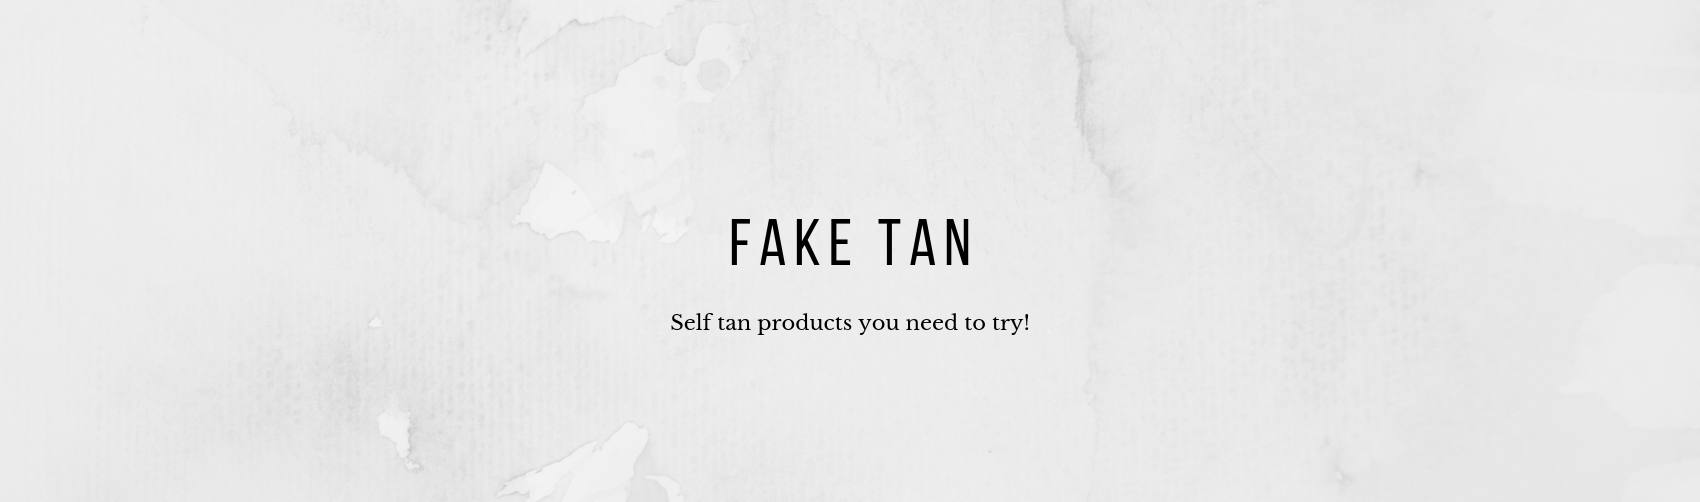 4 fake tans you need to try…